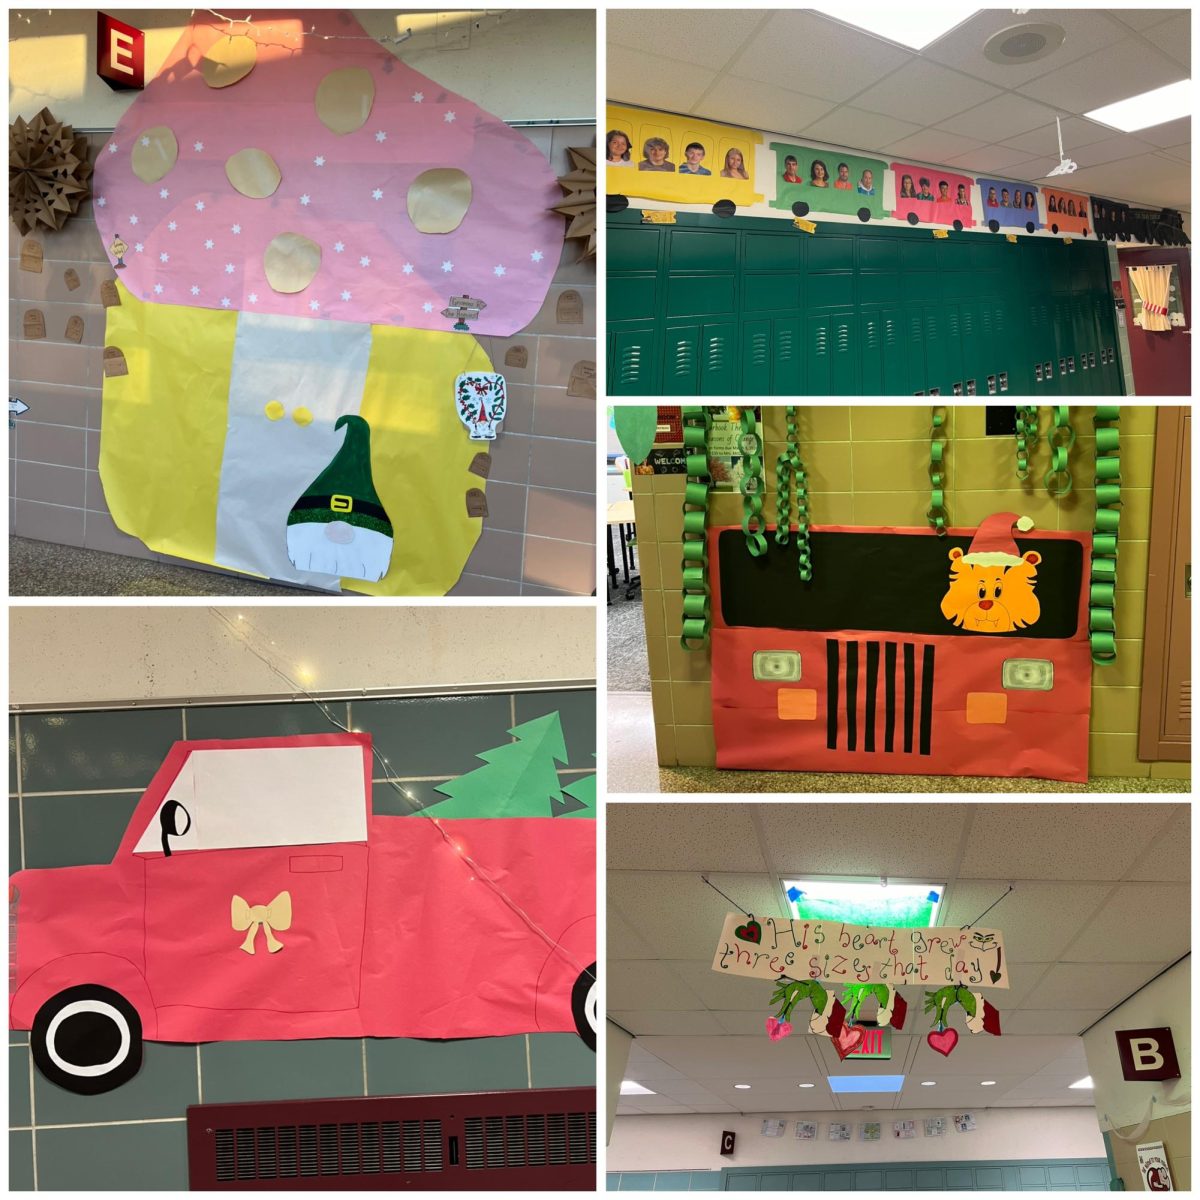 HAHS+students+participate+in+holiday+hallway+decorating